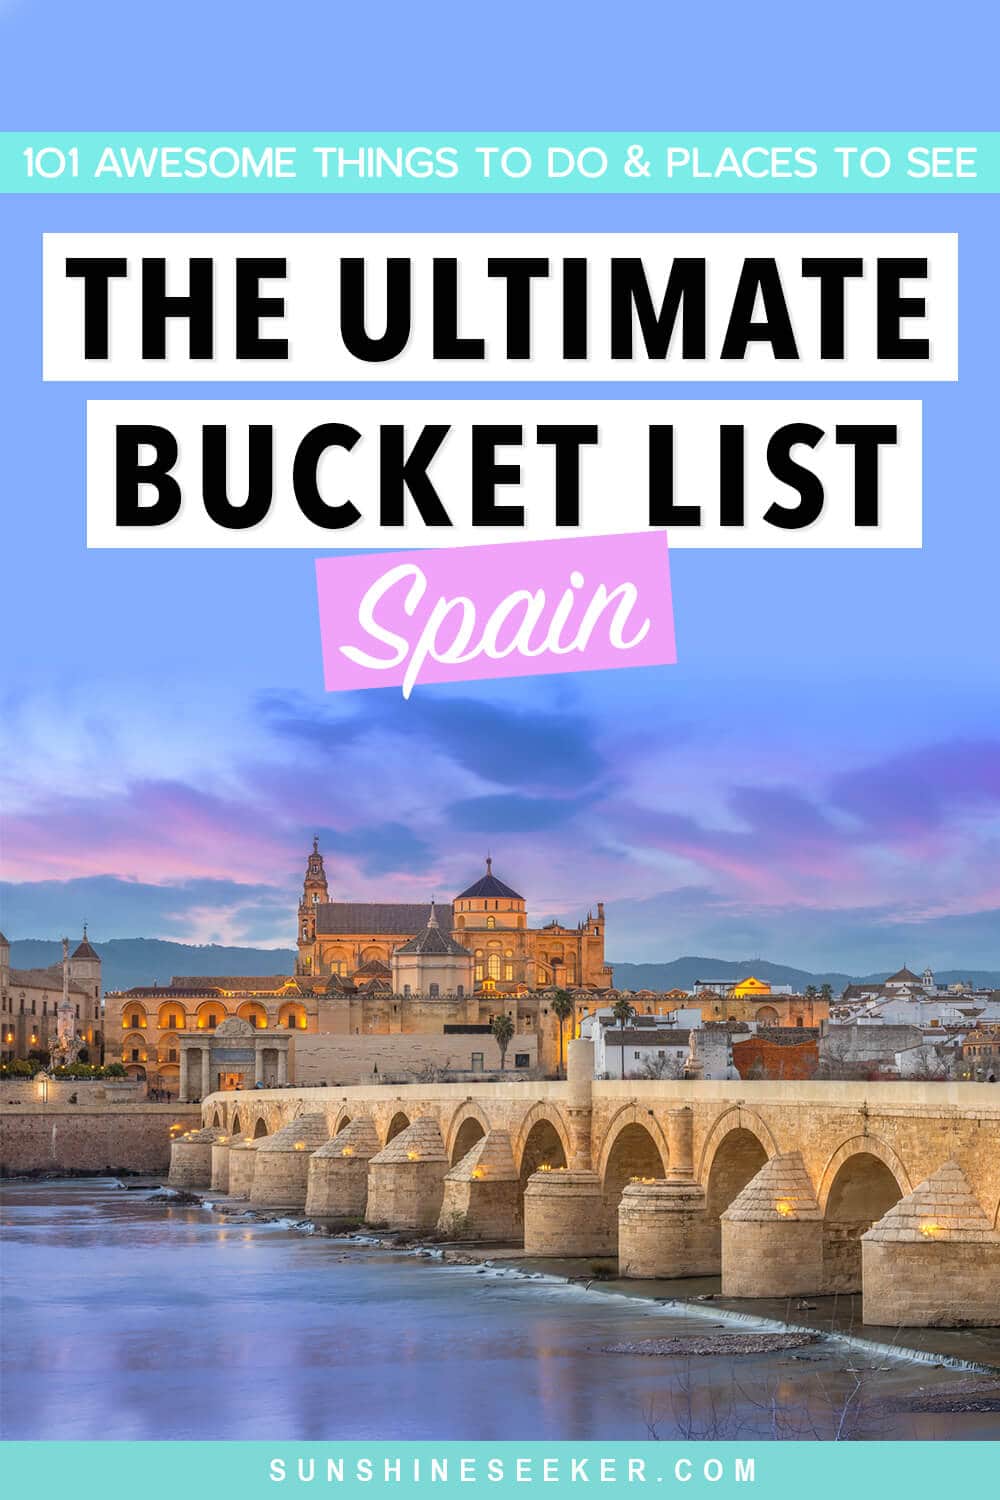 The Ultimate Spain Bucket List - From Cordoba to Barcelona and Murcia to the Cíes Islands. Here are 101 of the top things to do and places to see in Spain